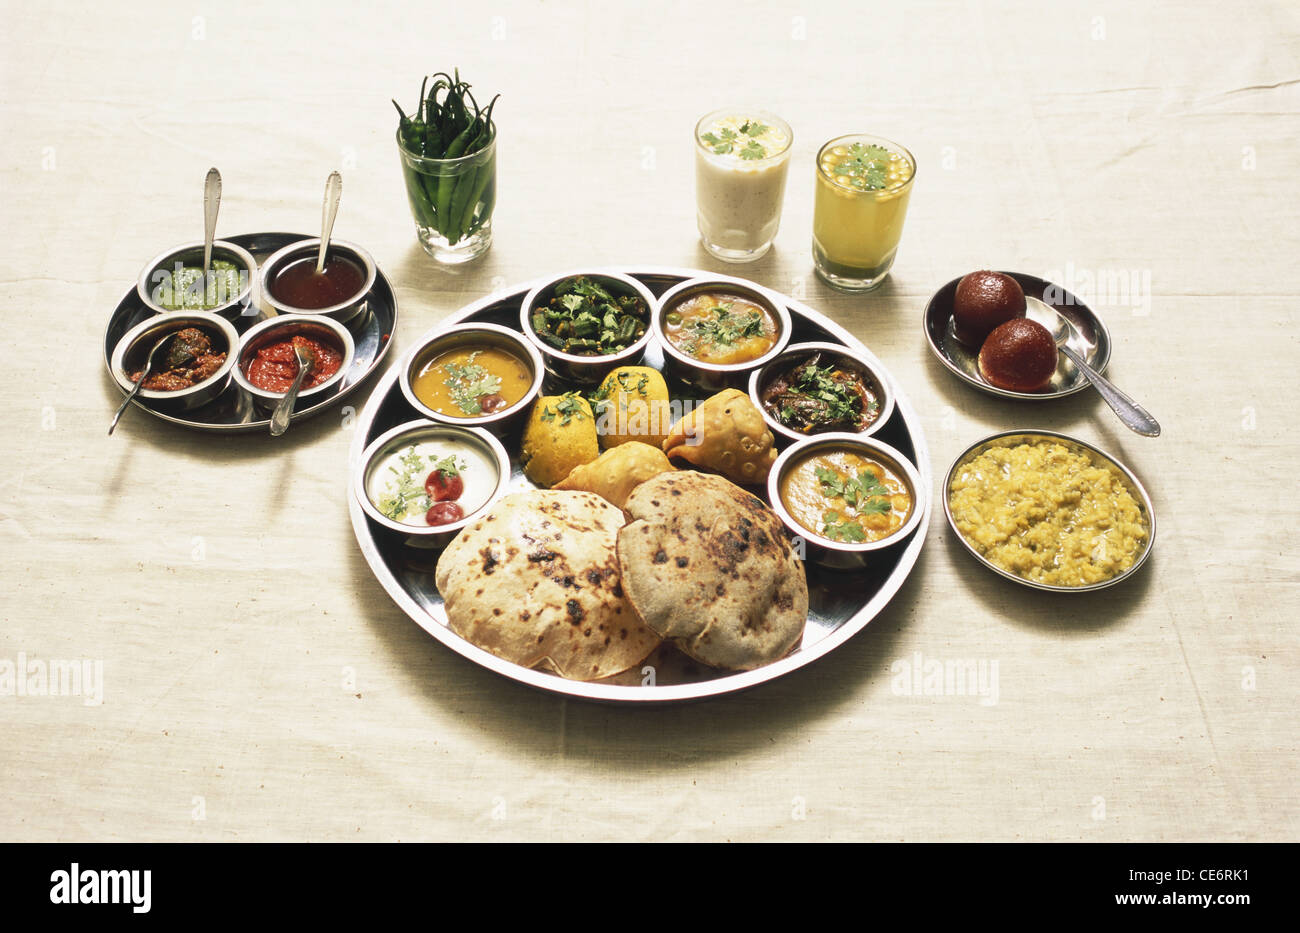 Indian vegetarian food lunch typical gujarati meal served in thali on